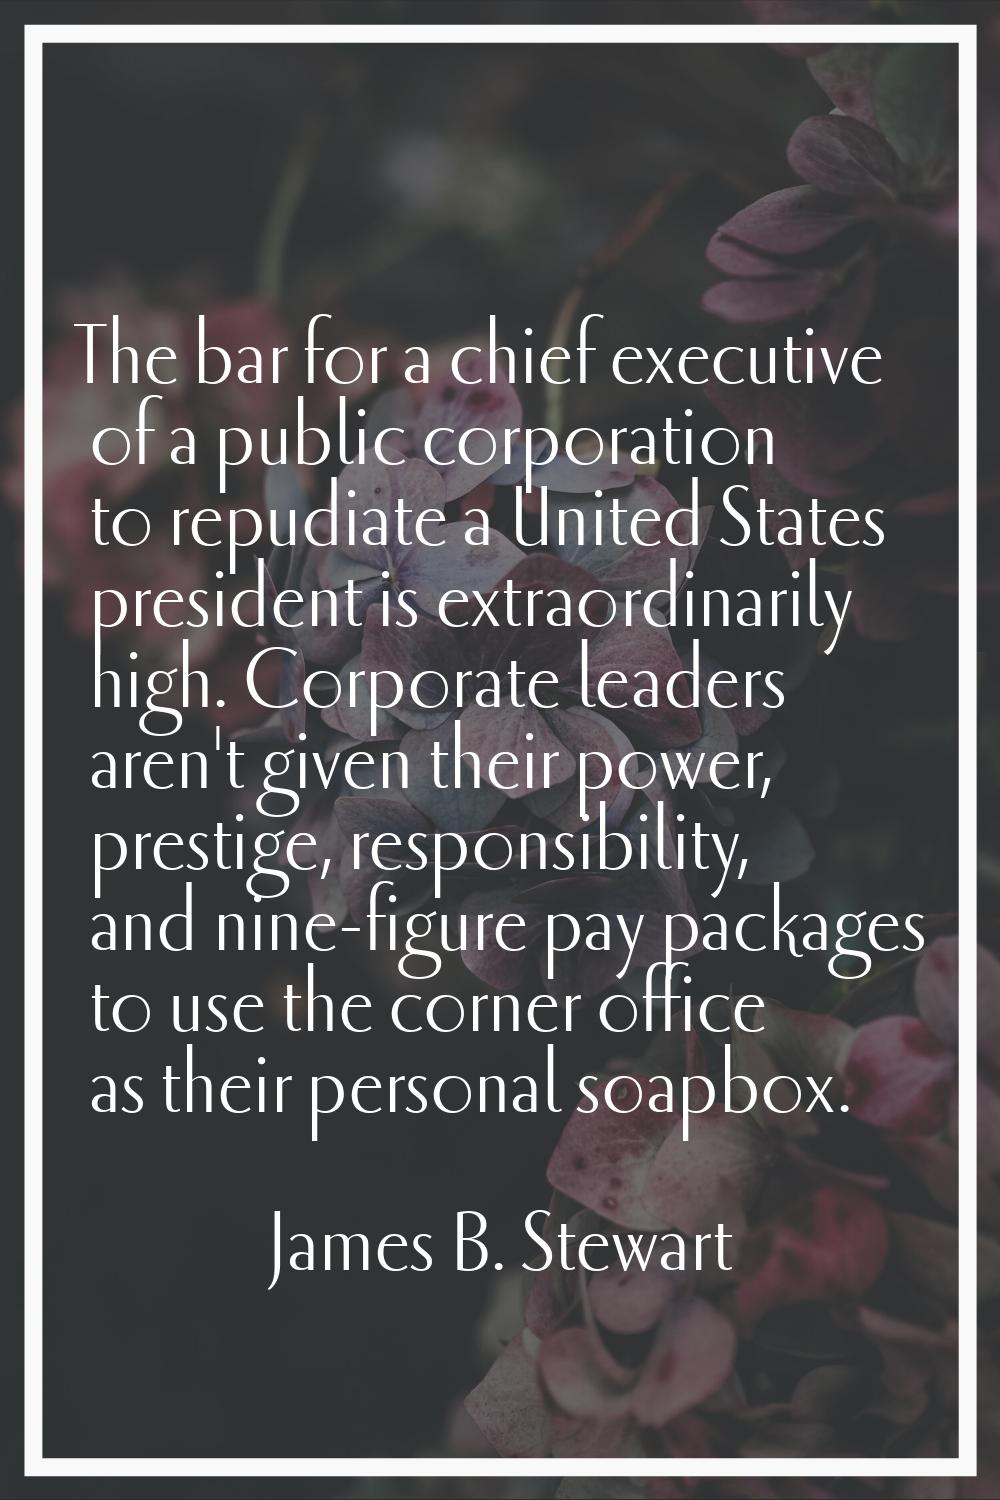 The bar for a chief executive of a public corporation to repudiate a United States president is ext